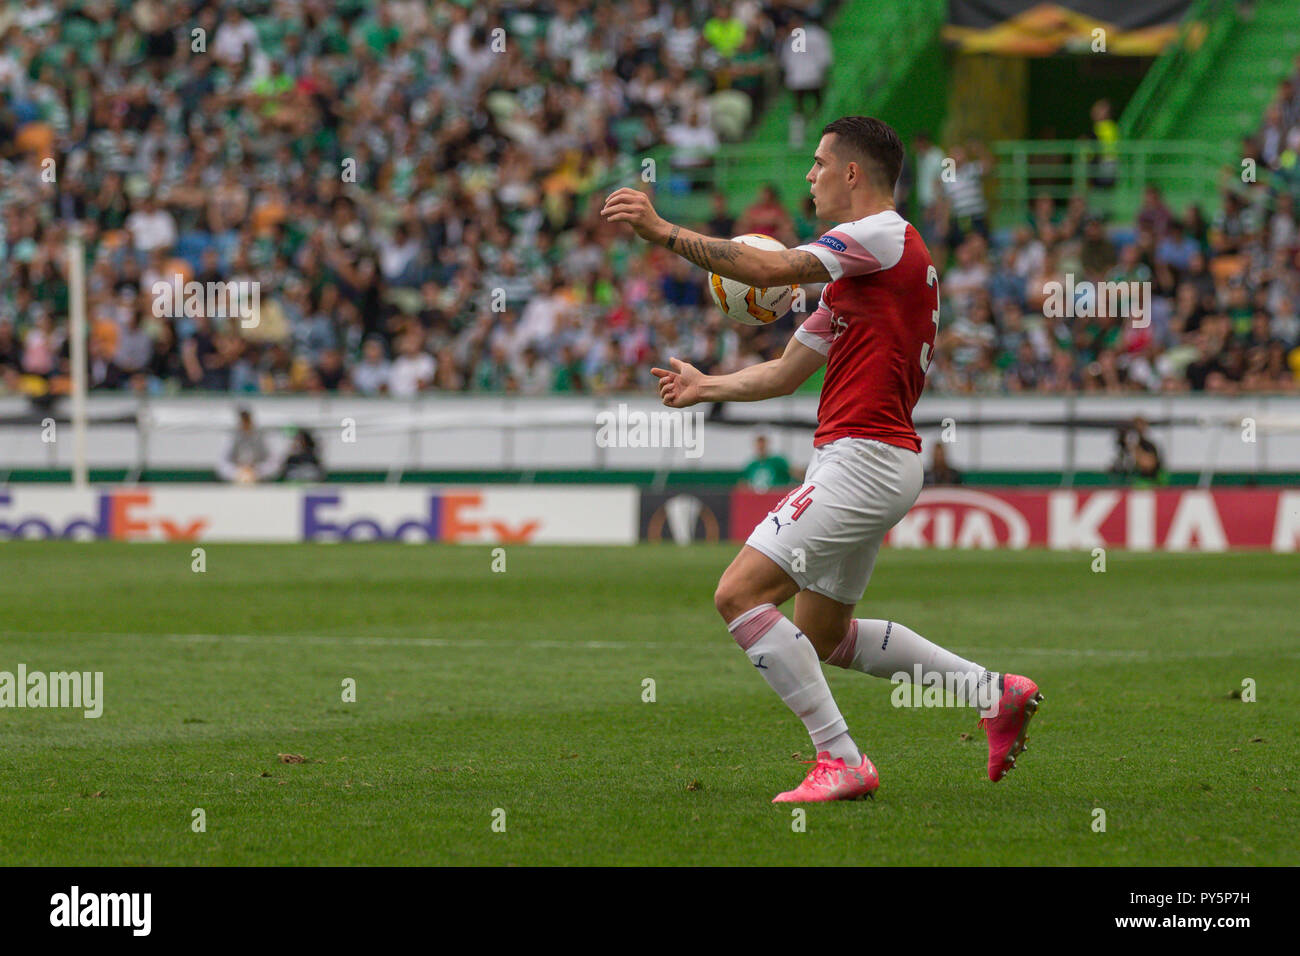 Lisbon, Portugal. October 25, 2018. Lisbon, Portugal. Arsenal's midfielder from Switzerland Granit Xhaka (34)  in action during the game of the UEFA Europa League, Group E, Sporting CP vs Arsenal FC Credit: Alexandre Sousa/Alamy Live News Stock Photo